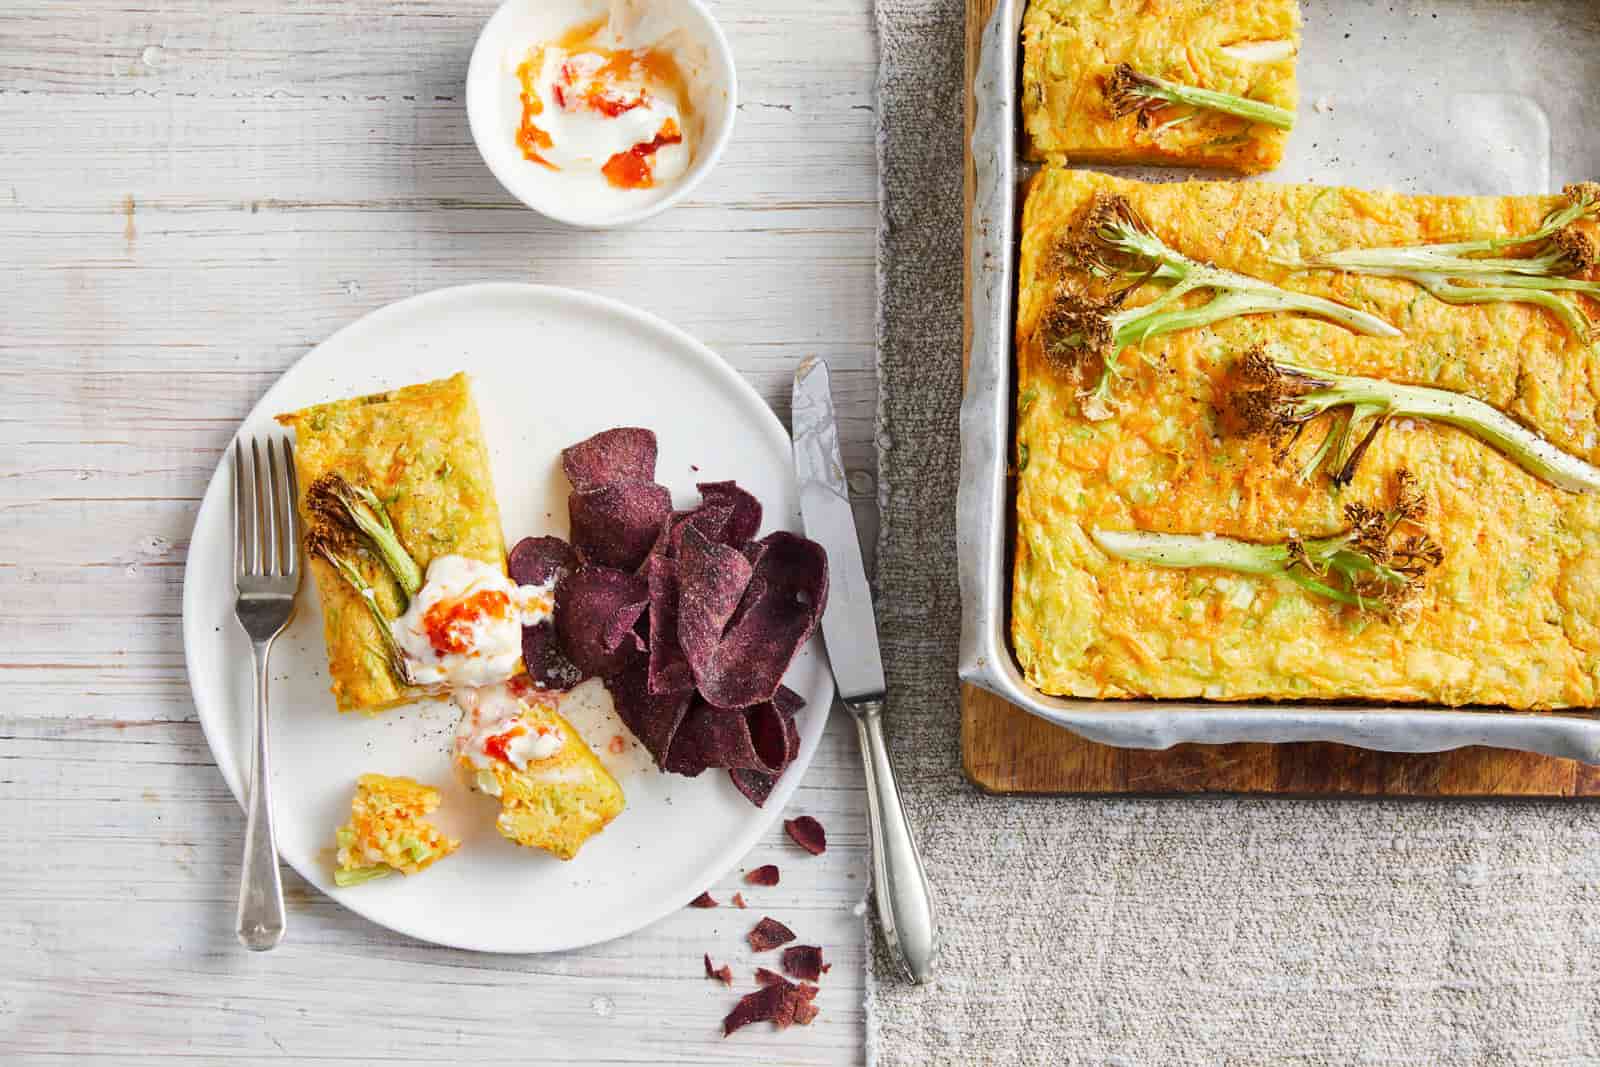 Carrot, halloumi and cauli-blossom slice in a baking tray, with a slice on a plate next to it.